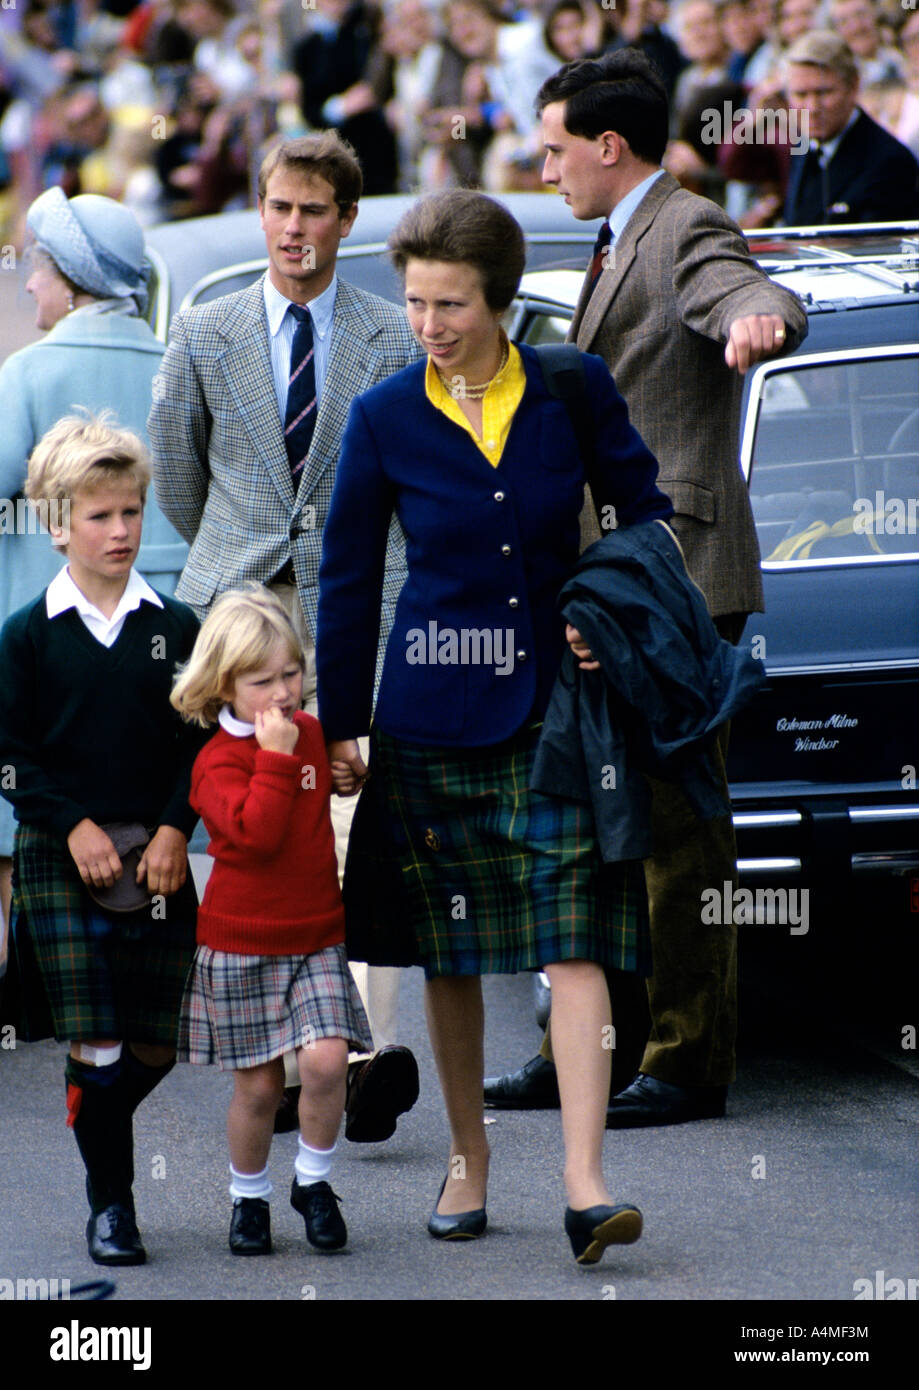 princess-royal-with-children-zara-and-peter-phillips-at-scrabster-A4MF3M.jpg